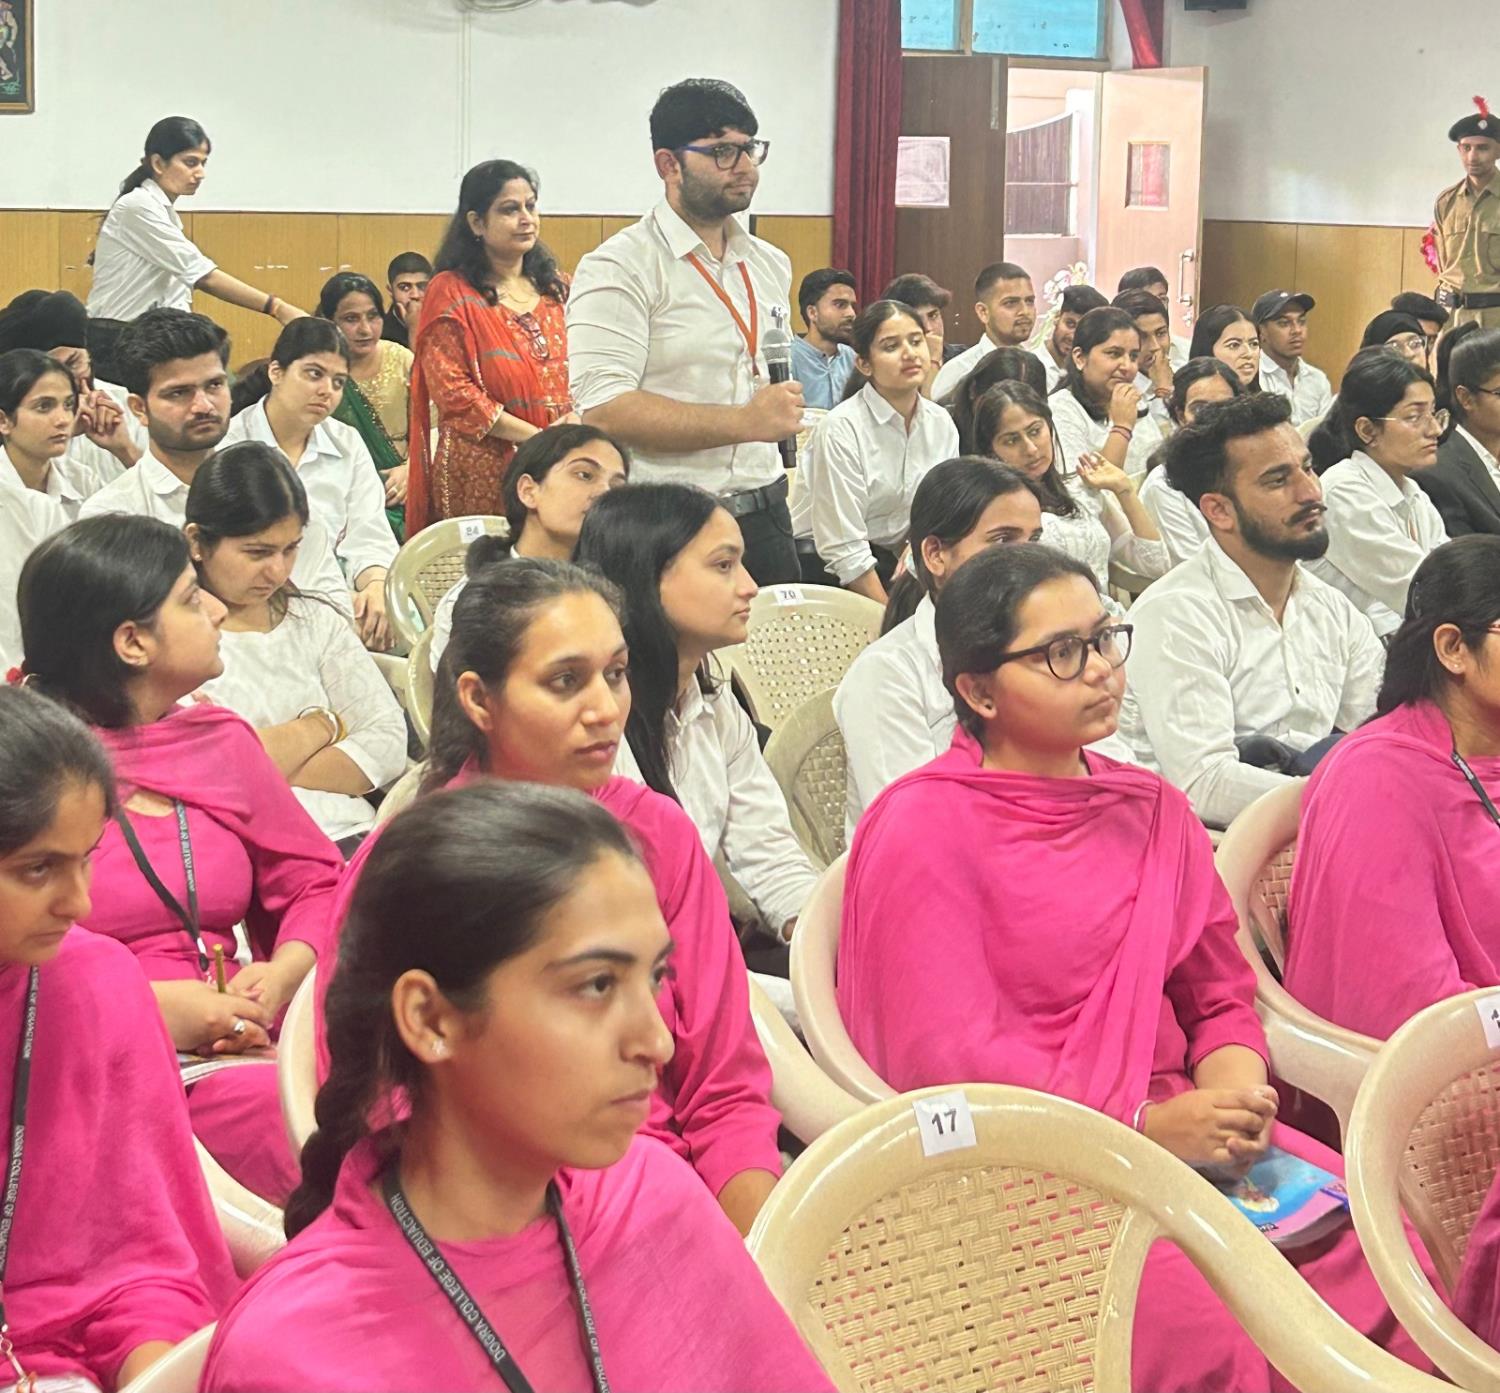 Dogra Group of Colleges hosted an enriching interactive session on Emerging Career Opportunities in the 21st Century